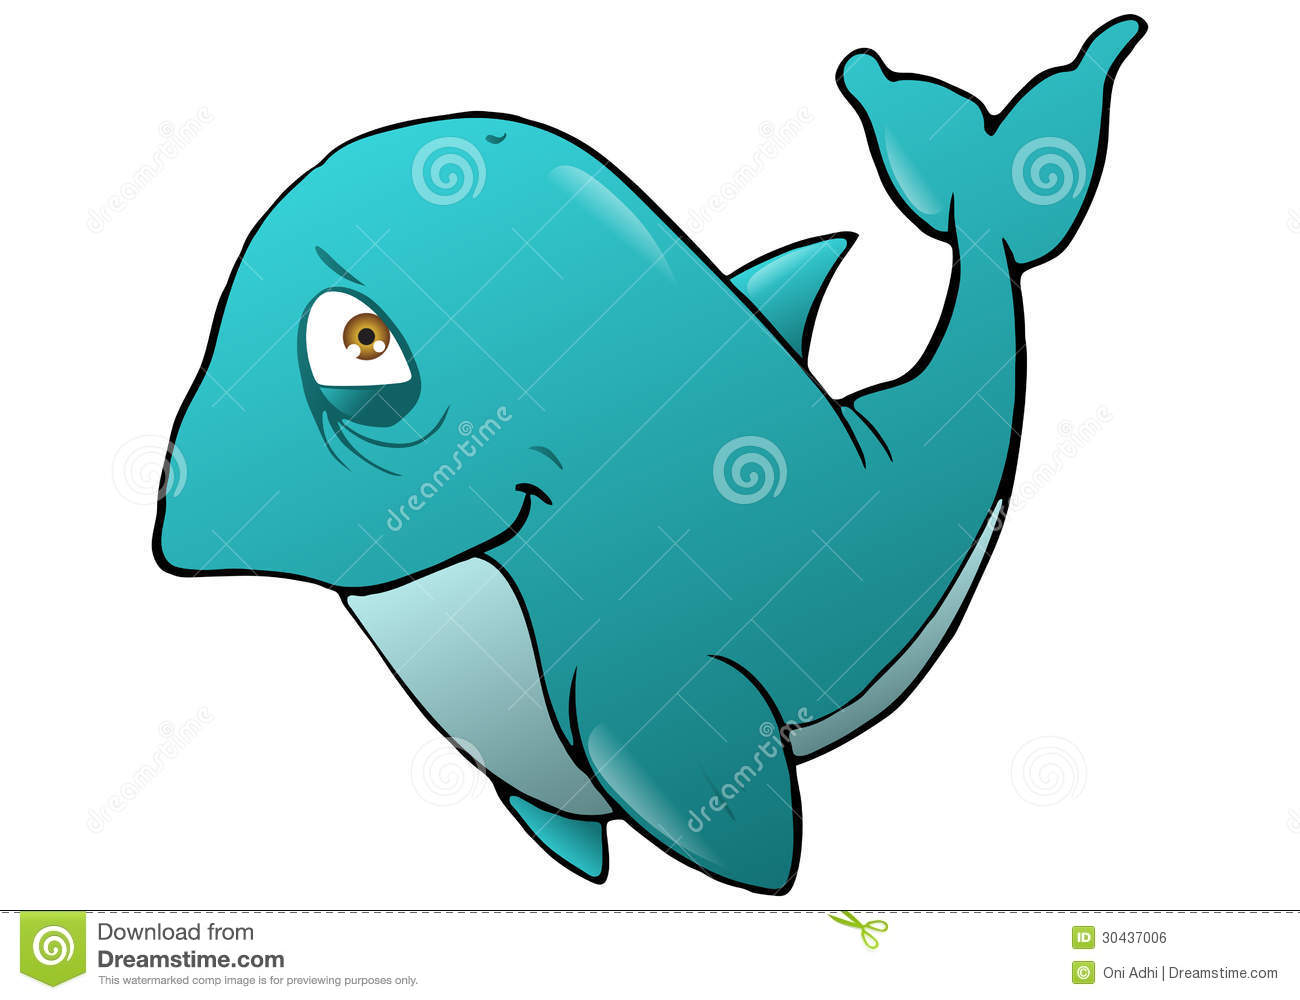 Smiling Whale Royalty Free Stock Image   Image  30437006